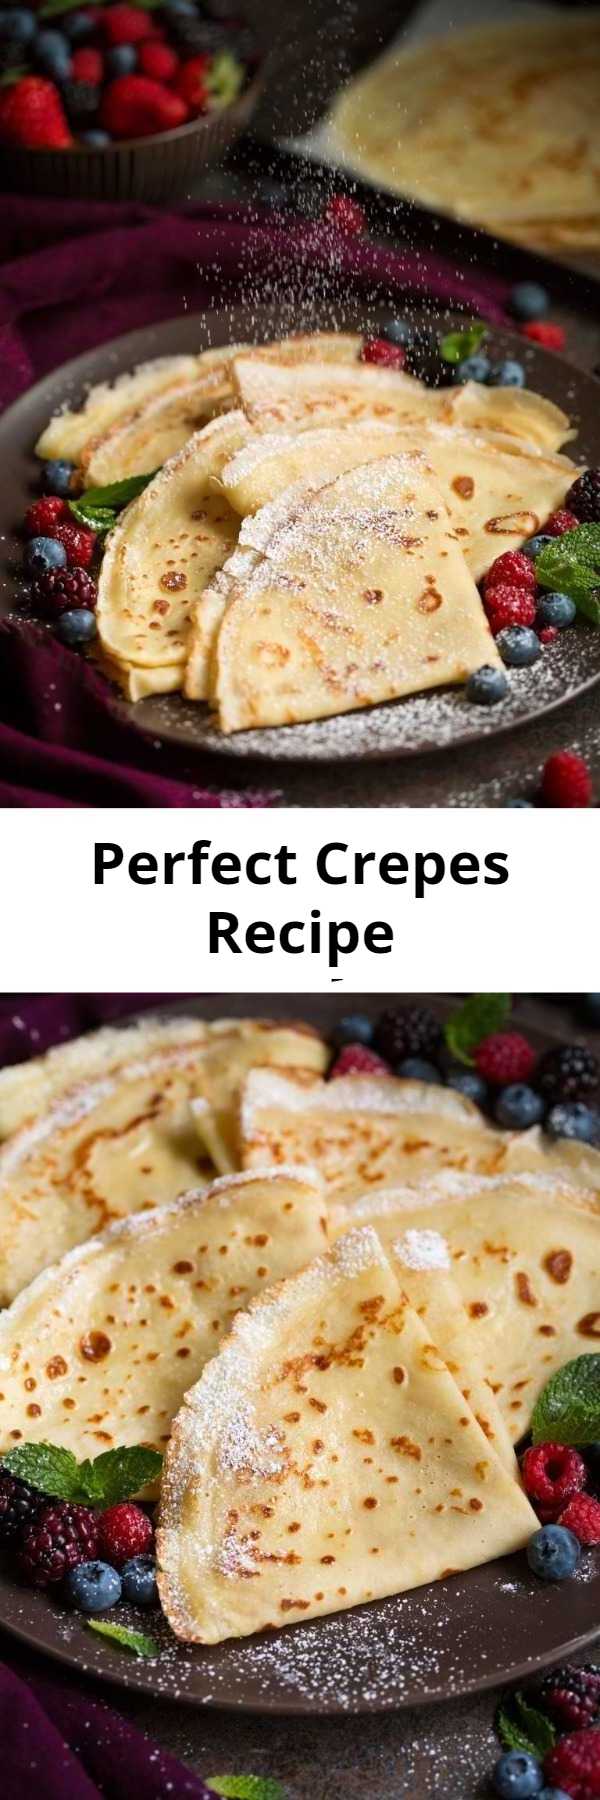 Perfect Crepes Recipe - These are my idea of the perfect crepes. Perfectly thin and incredibly delicious! Can be made sweet or savory. Dust with powdered sugar or fill with your favorite crepe fillings. #crepes #breakfast #dessert #recipe #french #food #homemade #diy #easy #blender